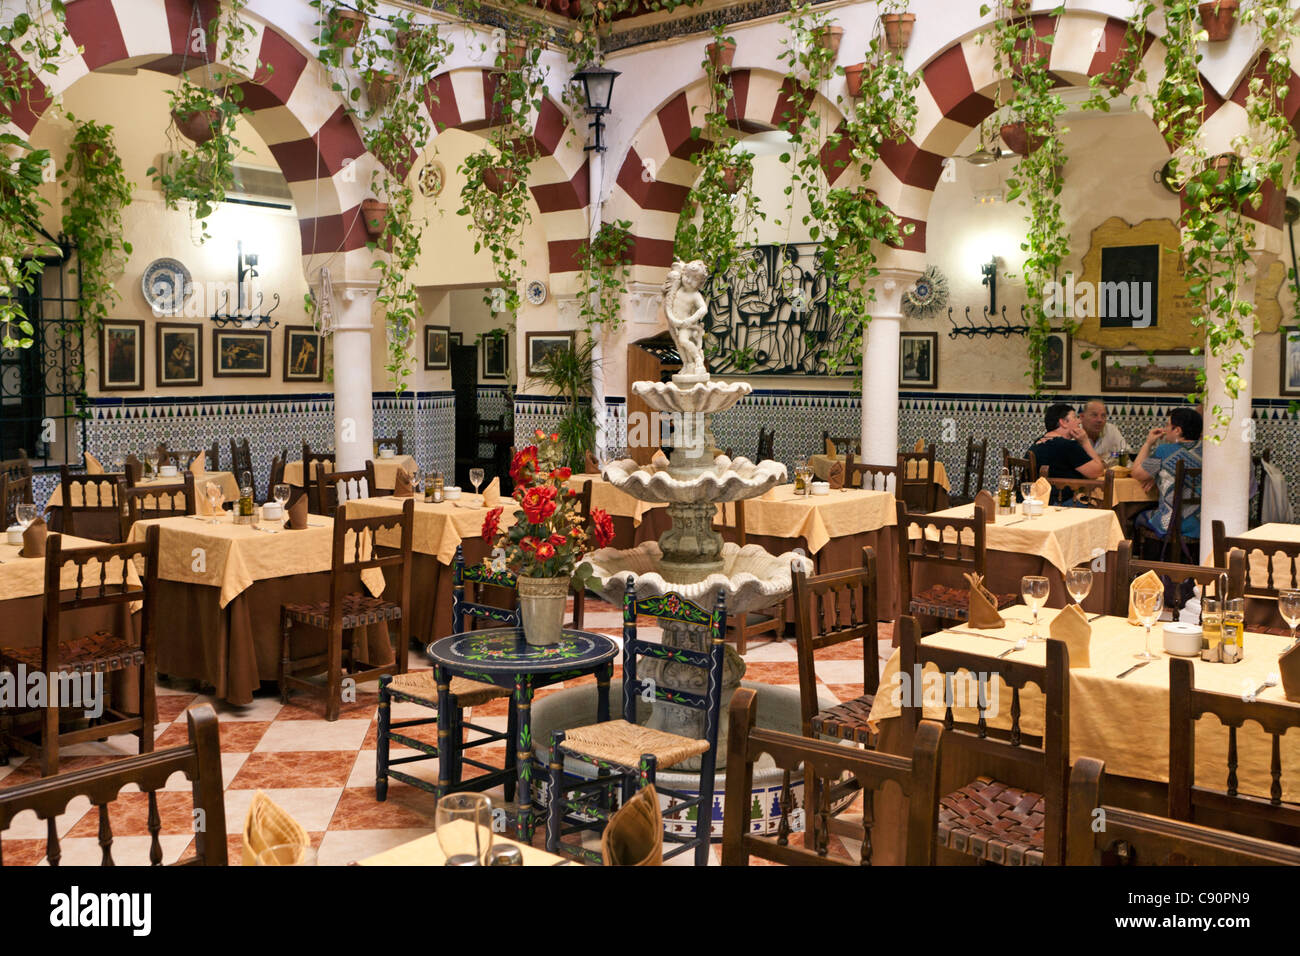 Courtyard interior of a restaurant in the old quarter, Cordoba, Spain Stock Photo